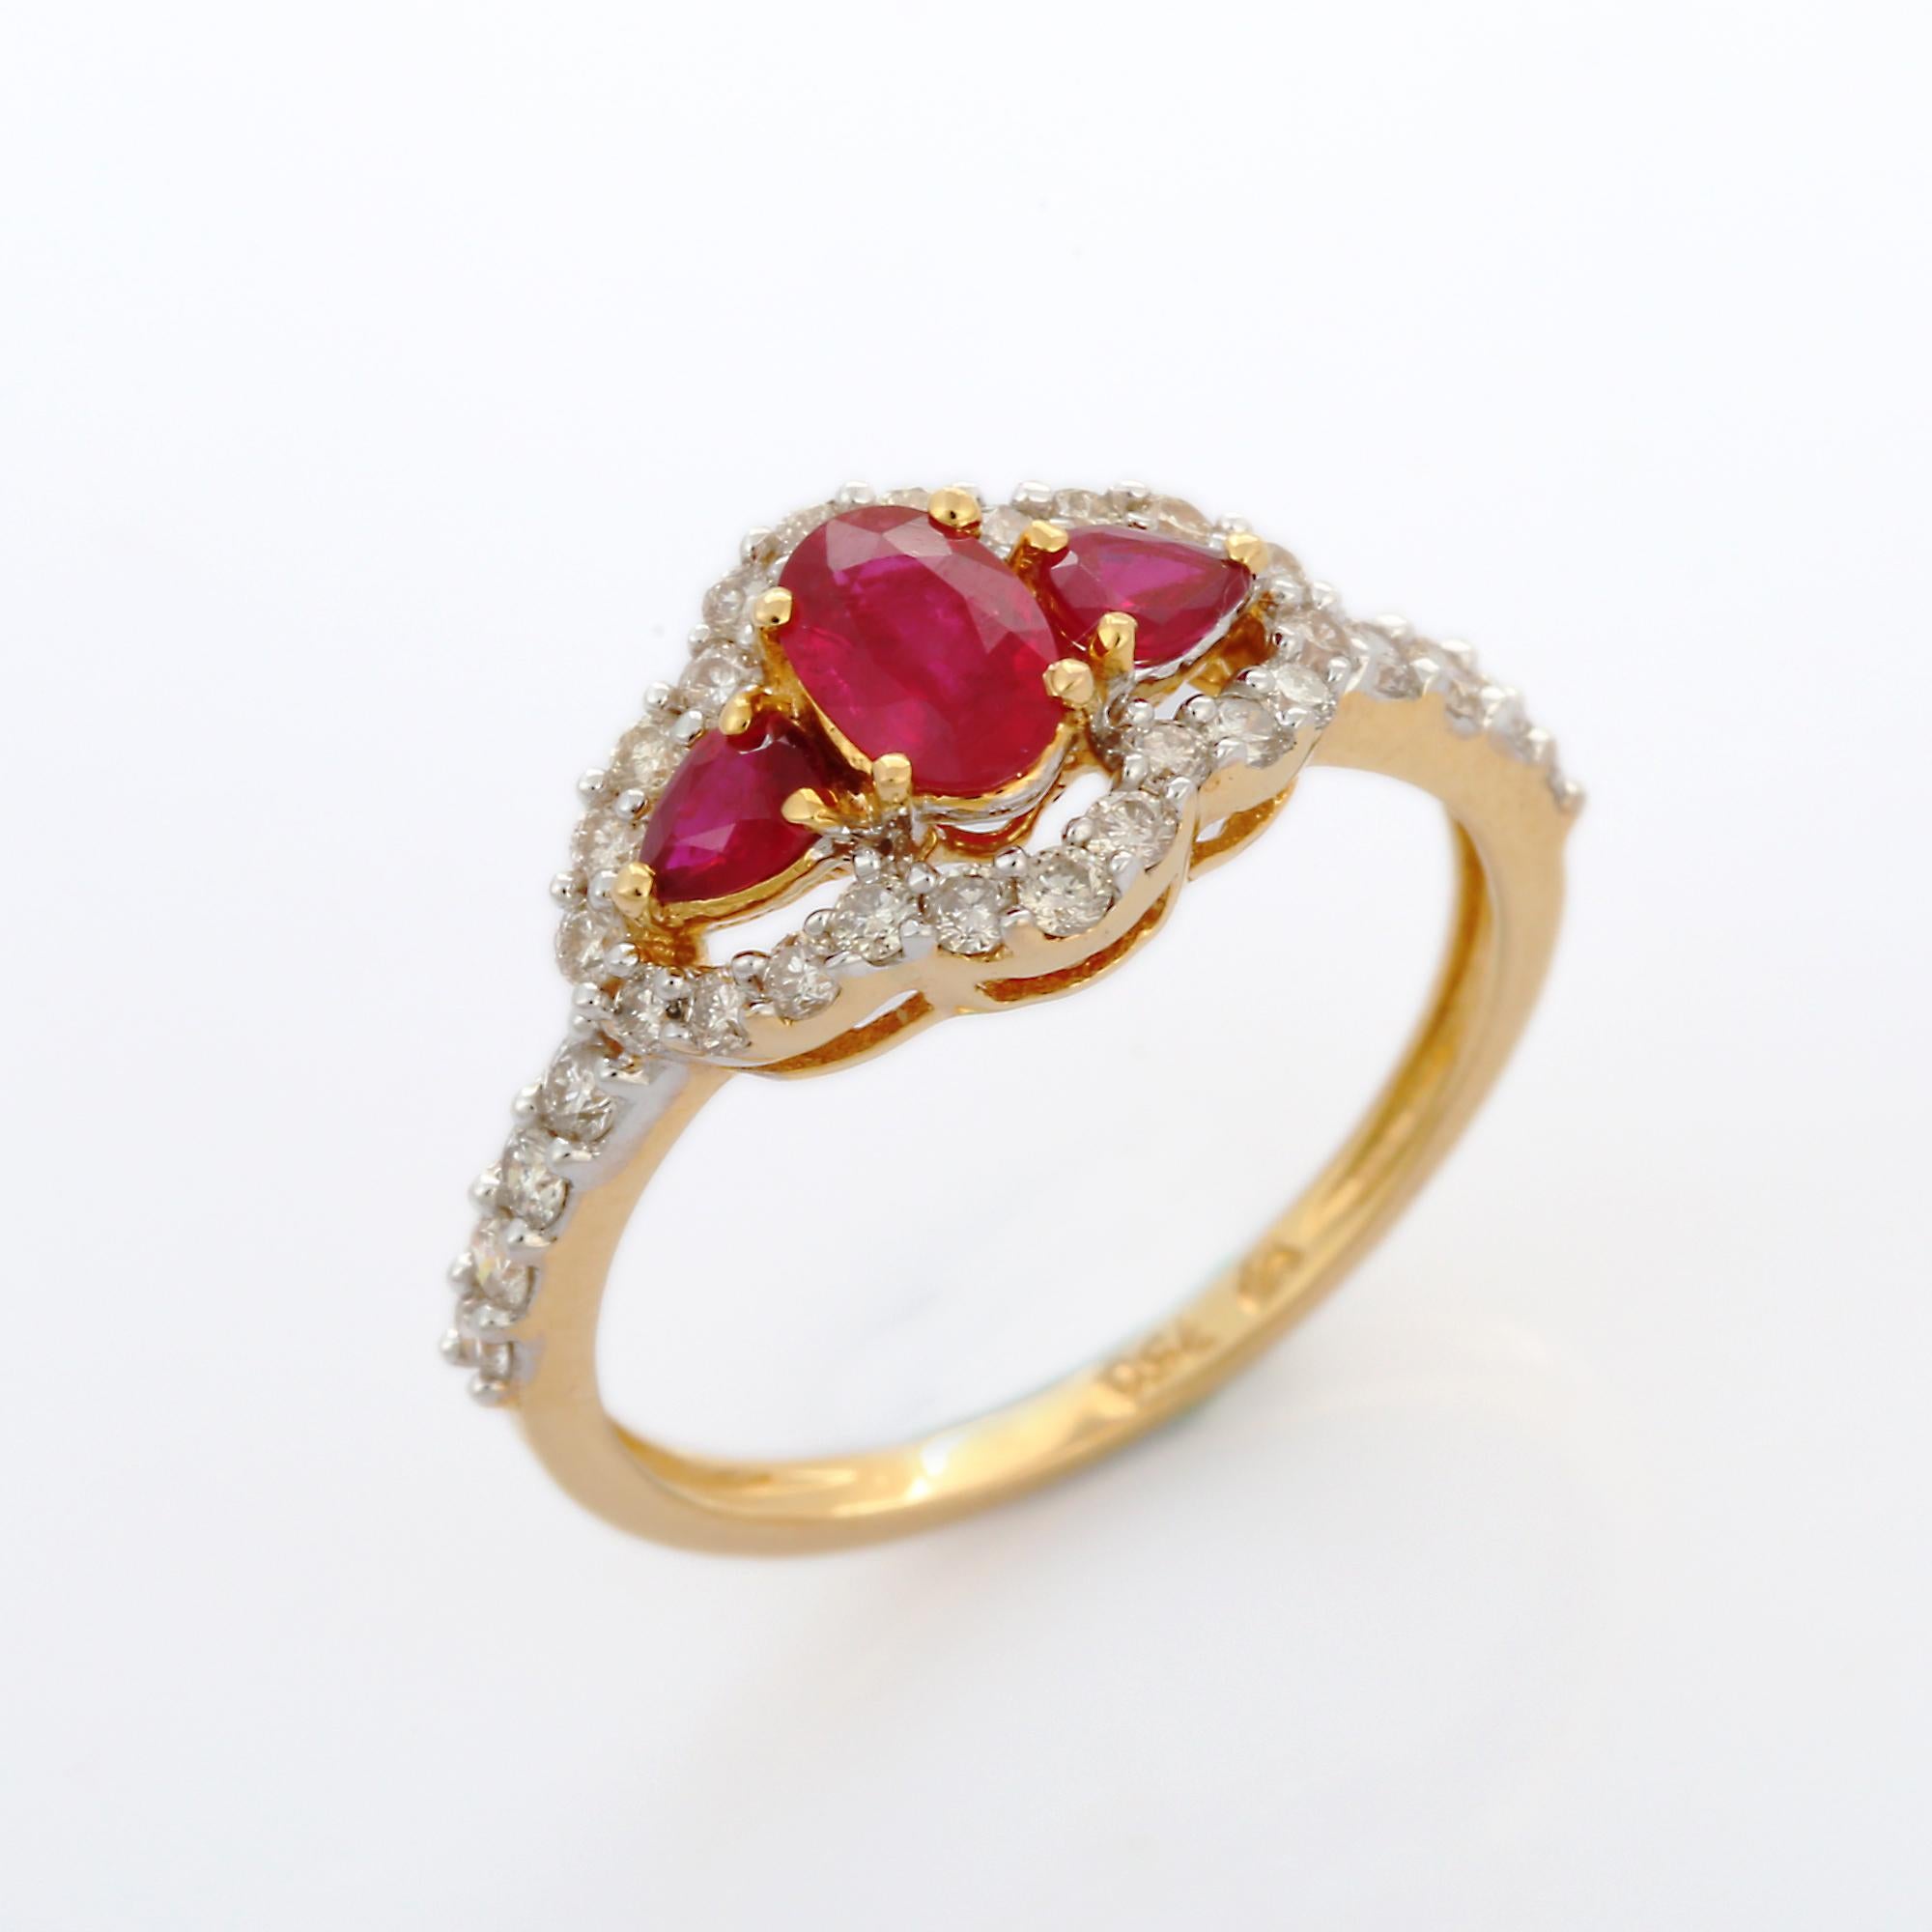 For Sale:  18K Yellow Gold Oval Cut Ruby Cluster Diamond Engagement Ring 7